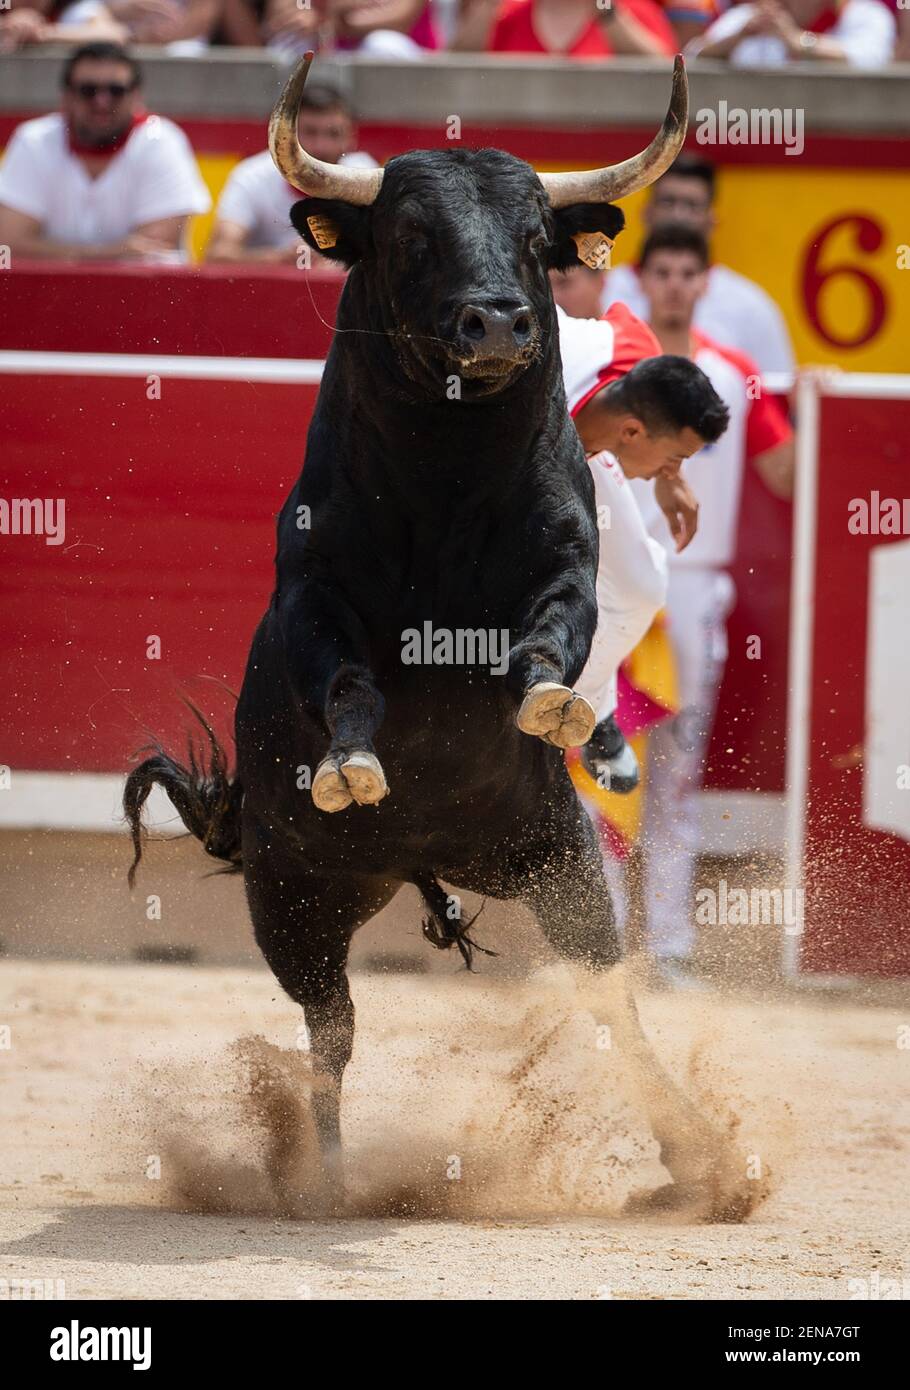 A ' recortador', or bull dogder, jumps over a bull while competing in the 'Concurso de recortadores' (Contest of Bull Dodgers) at the Pamplona bullring during the Sanfermines festivities in Pamplona, Spain, 13 July 2019. The recortadores leap over bulls as part of events taking place during the festival of San Fermin, locally known as Sanfermines, that is held annually from 06 to 14 July in commemoration of the city's patron saint. Hundreds of thousands of visitors from all over the world attend the fiesta. Many of them physically participate in the highlight event - the running of the bulls,  Stock Photo